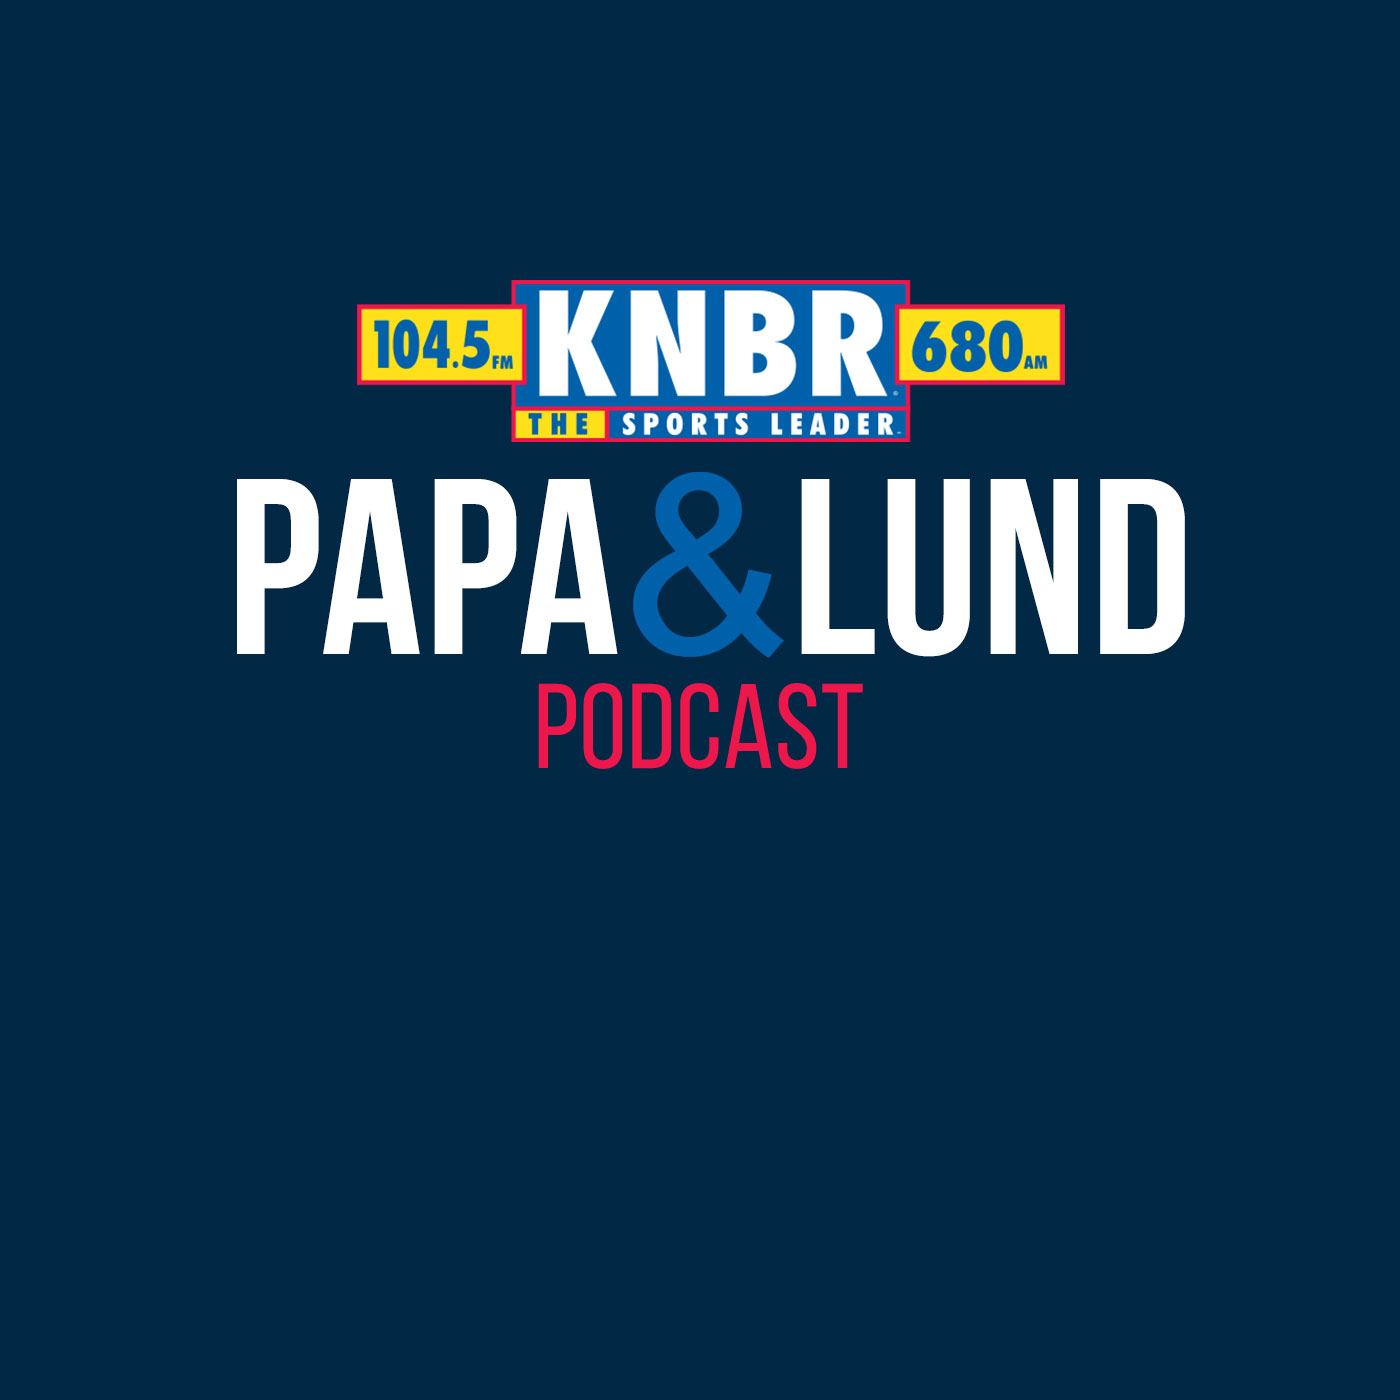 3-4 Greg Amsinger joins Papa & Lund to discuss his time with the club this weekend and the impact of signing Matt Chapman and if there is more to come from Farhan & the Giants